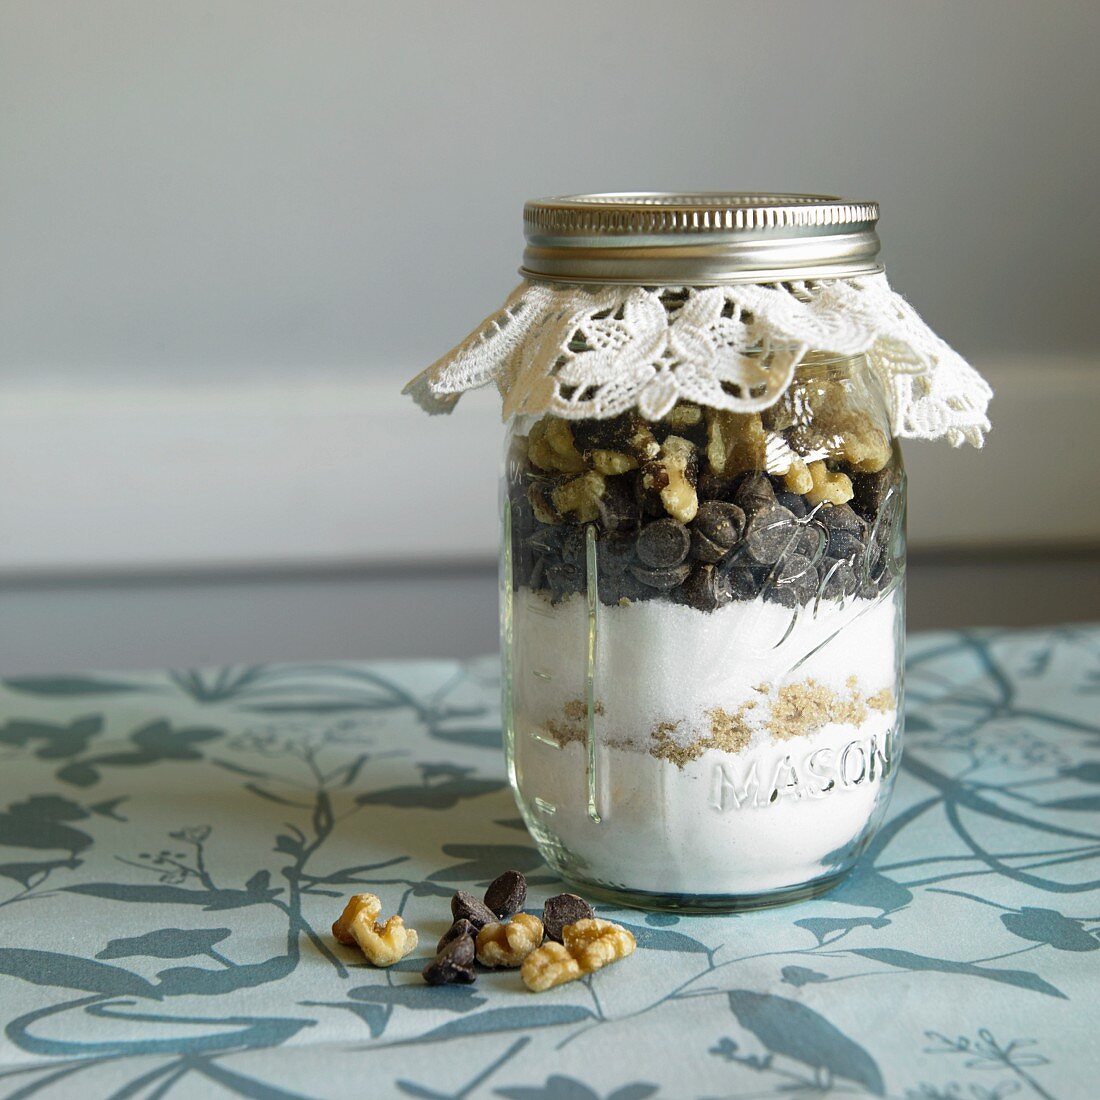 A jar containing dry ingredients for making walnut chocolate chip cookies